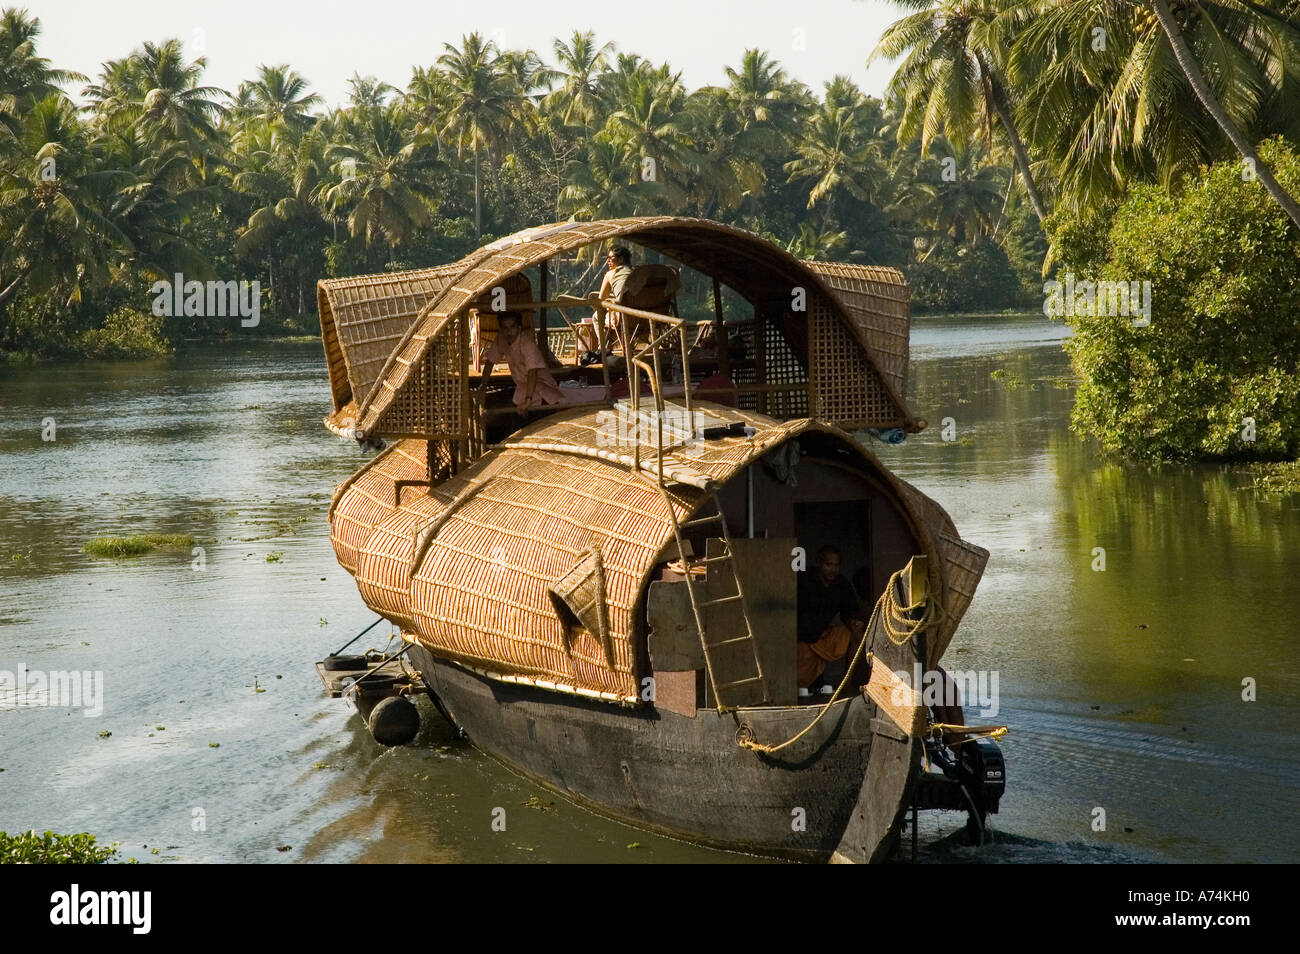 A house hotel boat on the backwaters in Kerala South India Stock Photo